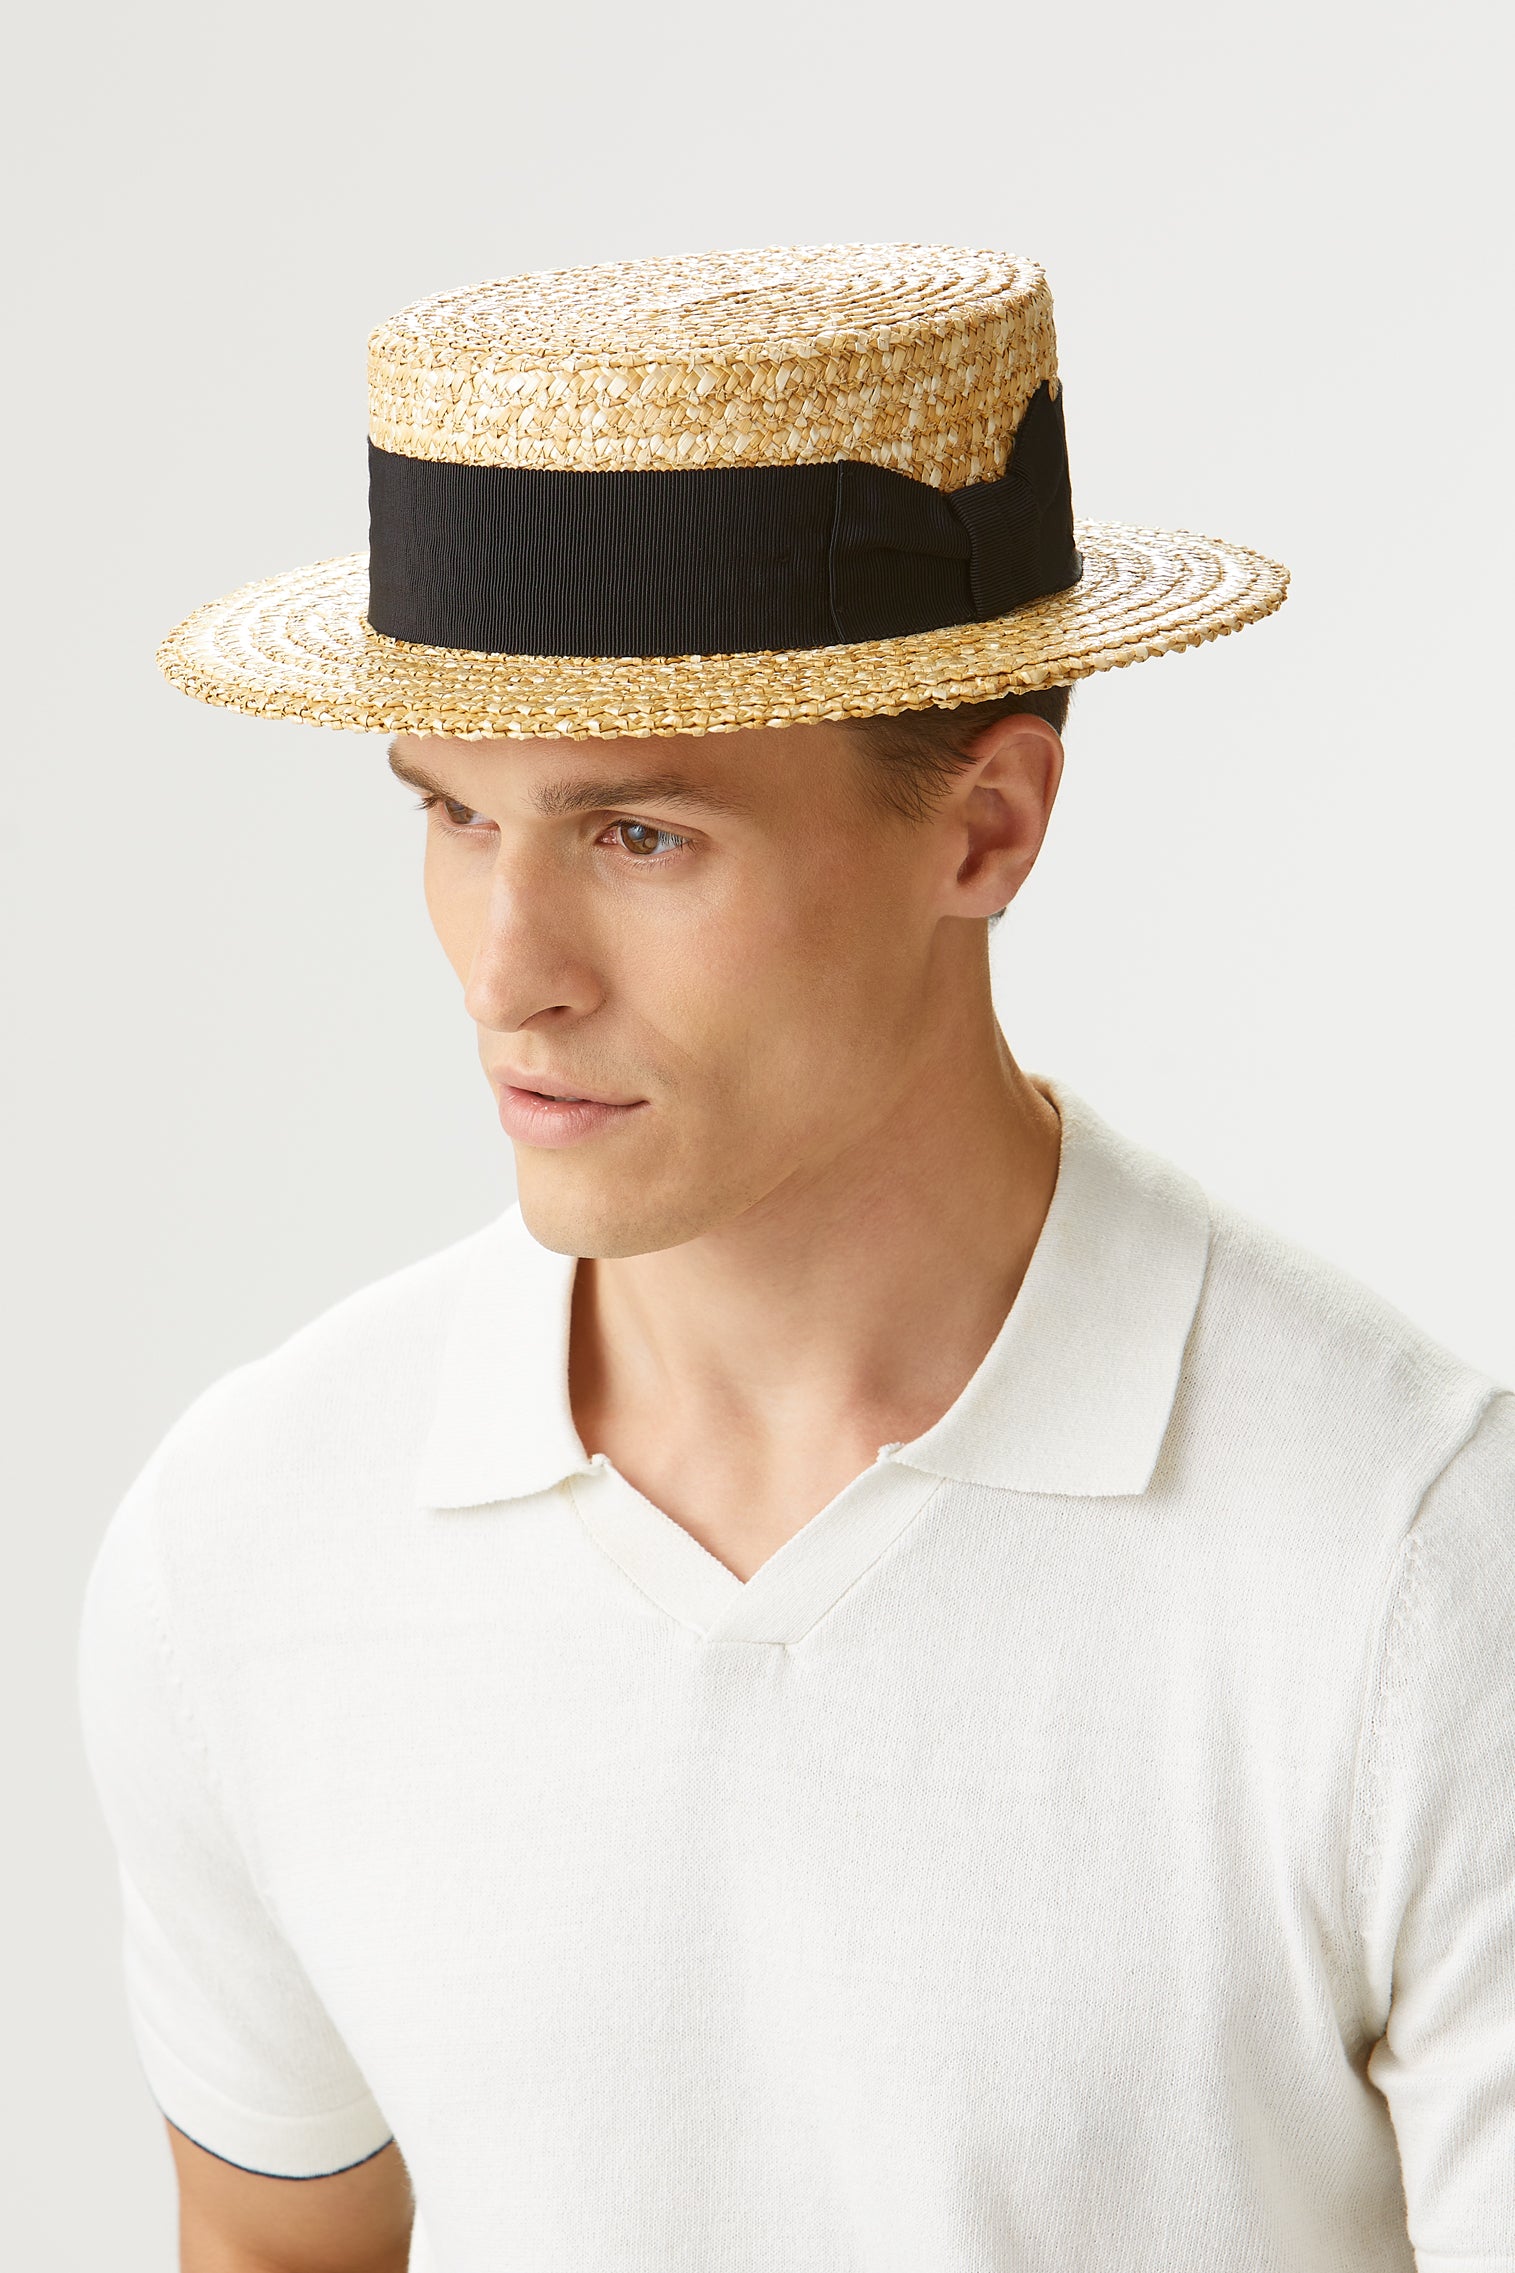 Classic Boater - Hats for Oval Face Shapes - Lock & Co. Hatters London UK